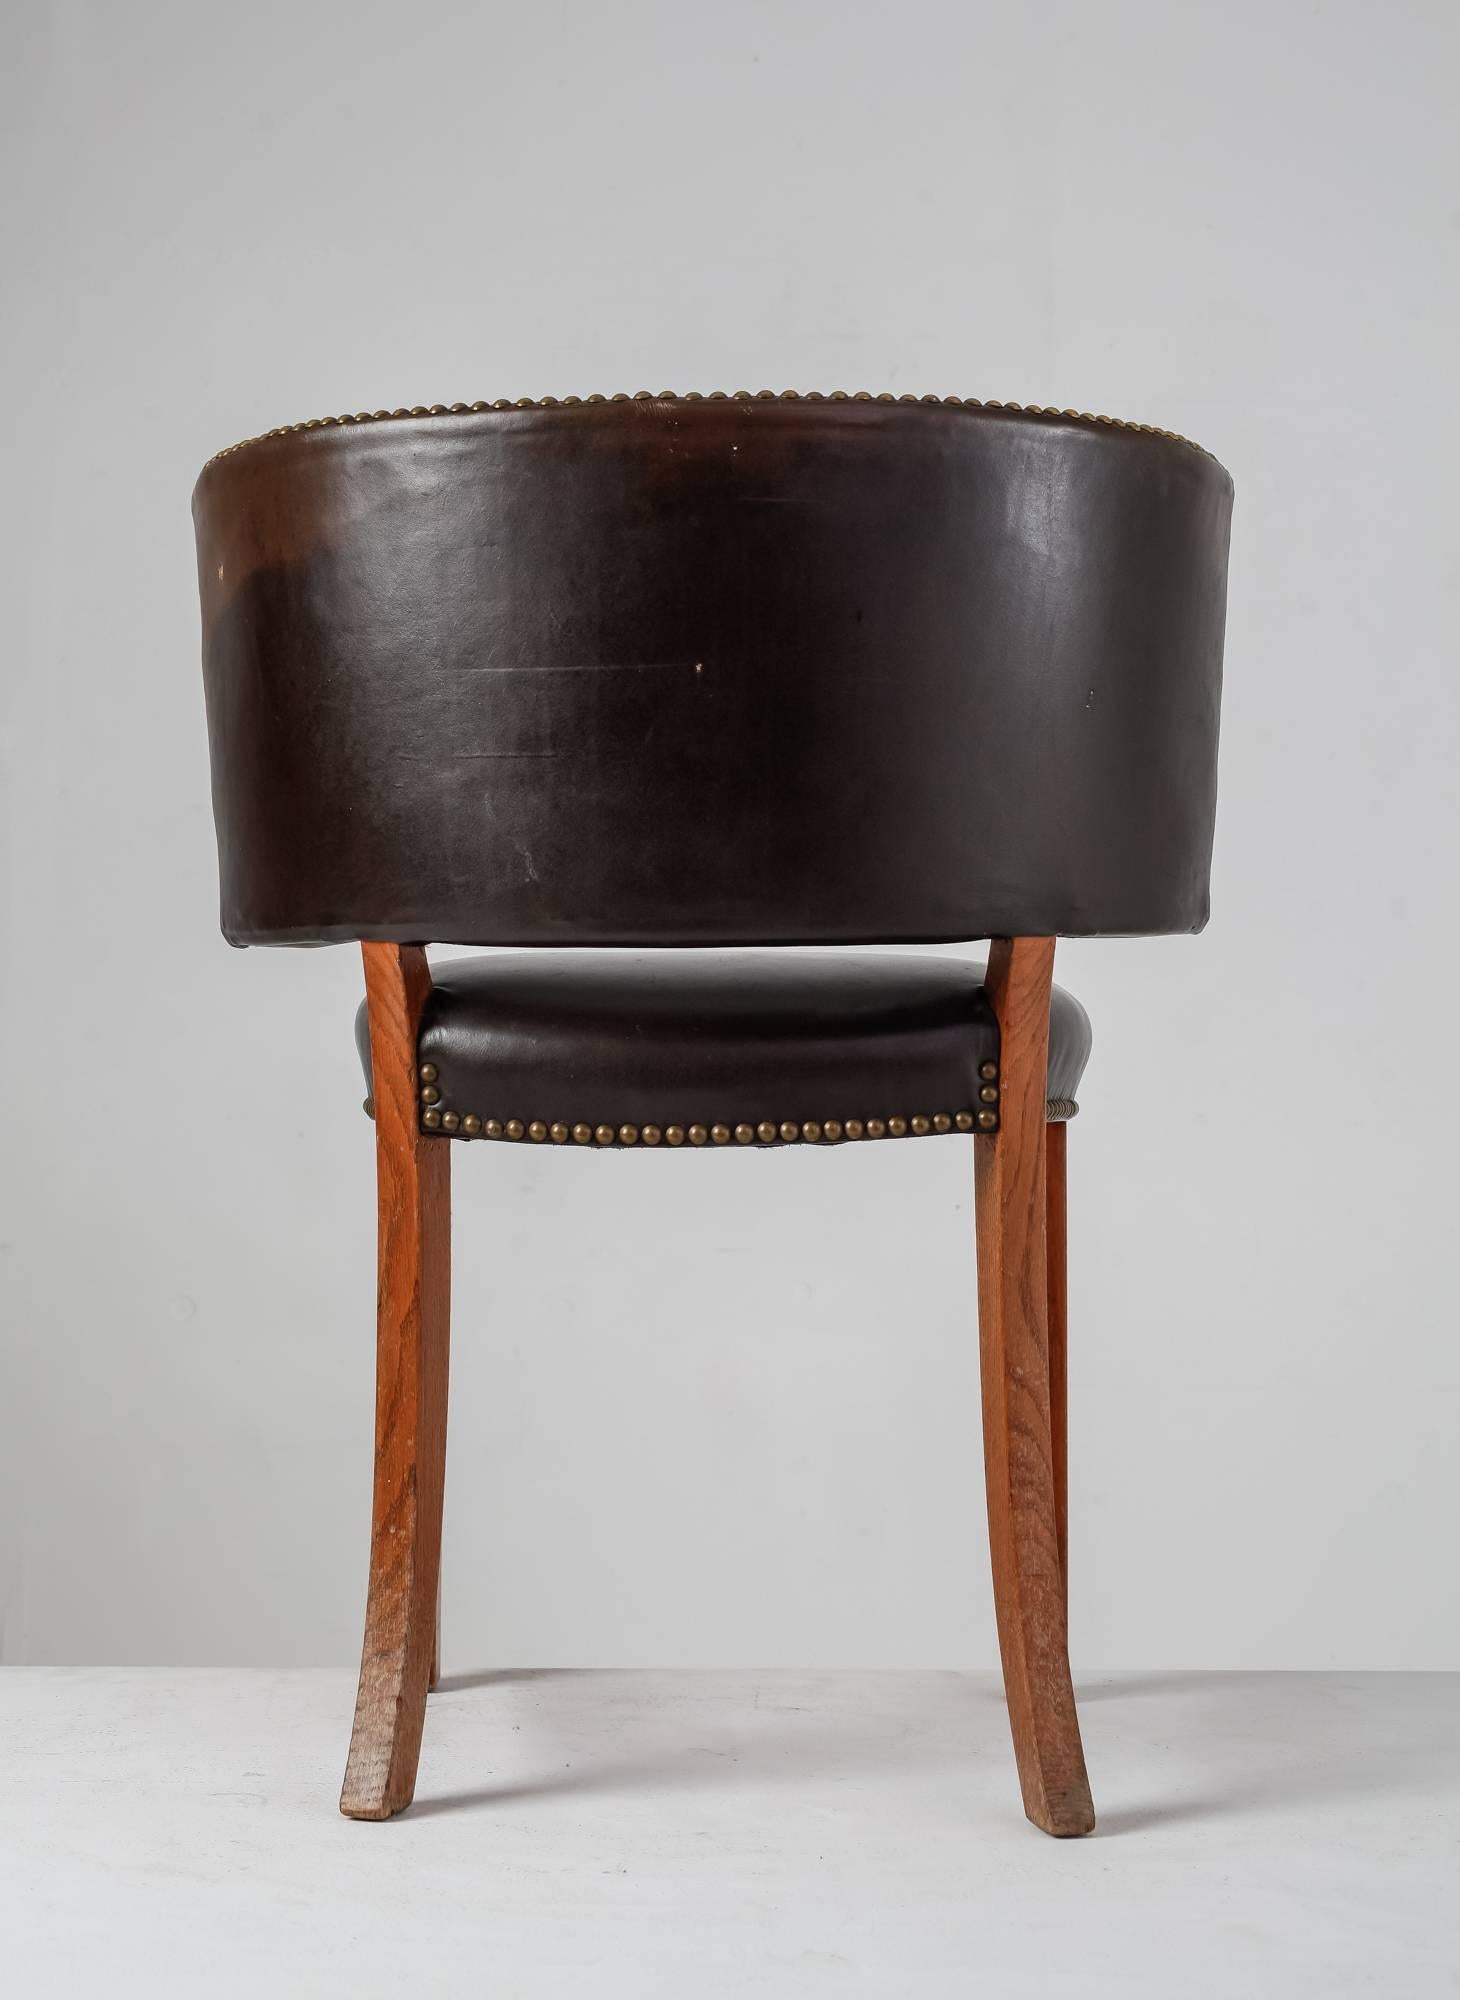 Danish Oak and Leather Sidechair with Large, Curved Backrest, 1930s In Good Condition For Sale In Maastricht, NL